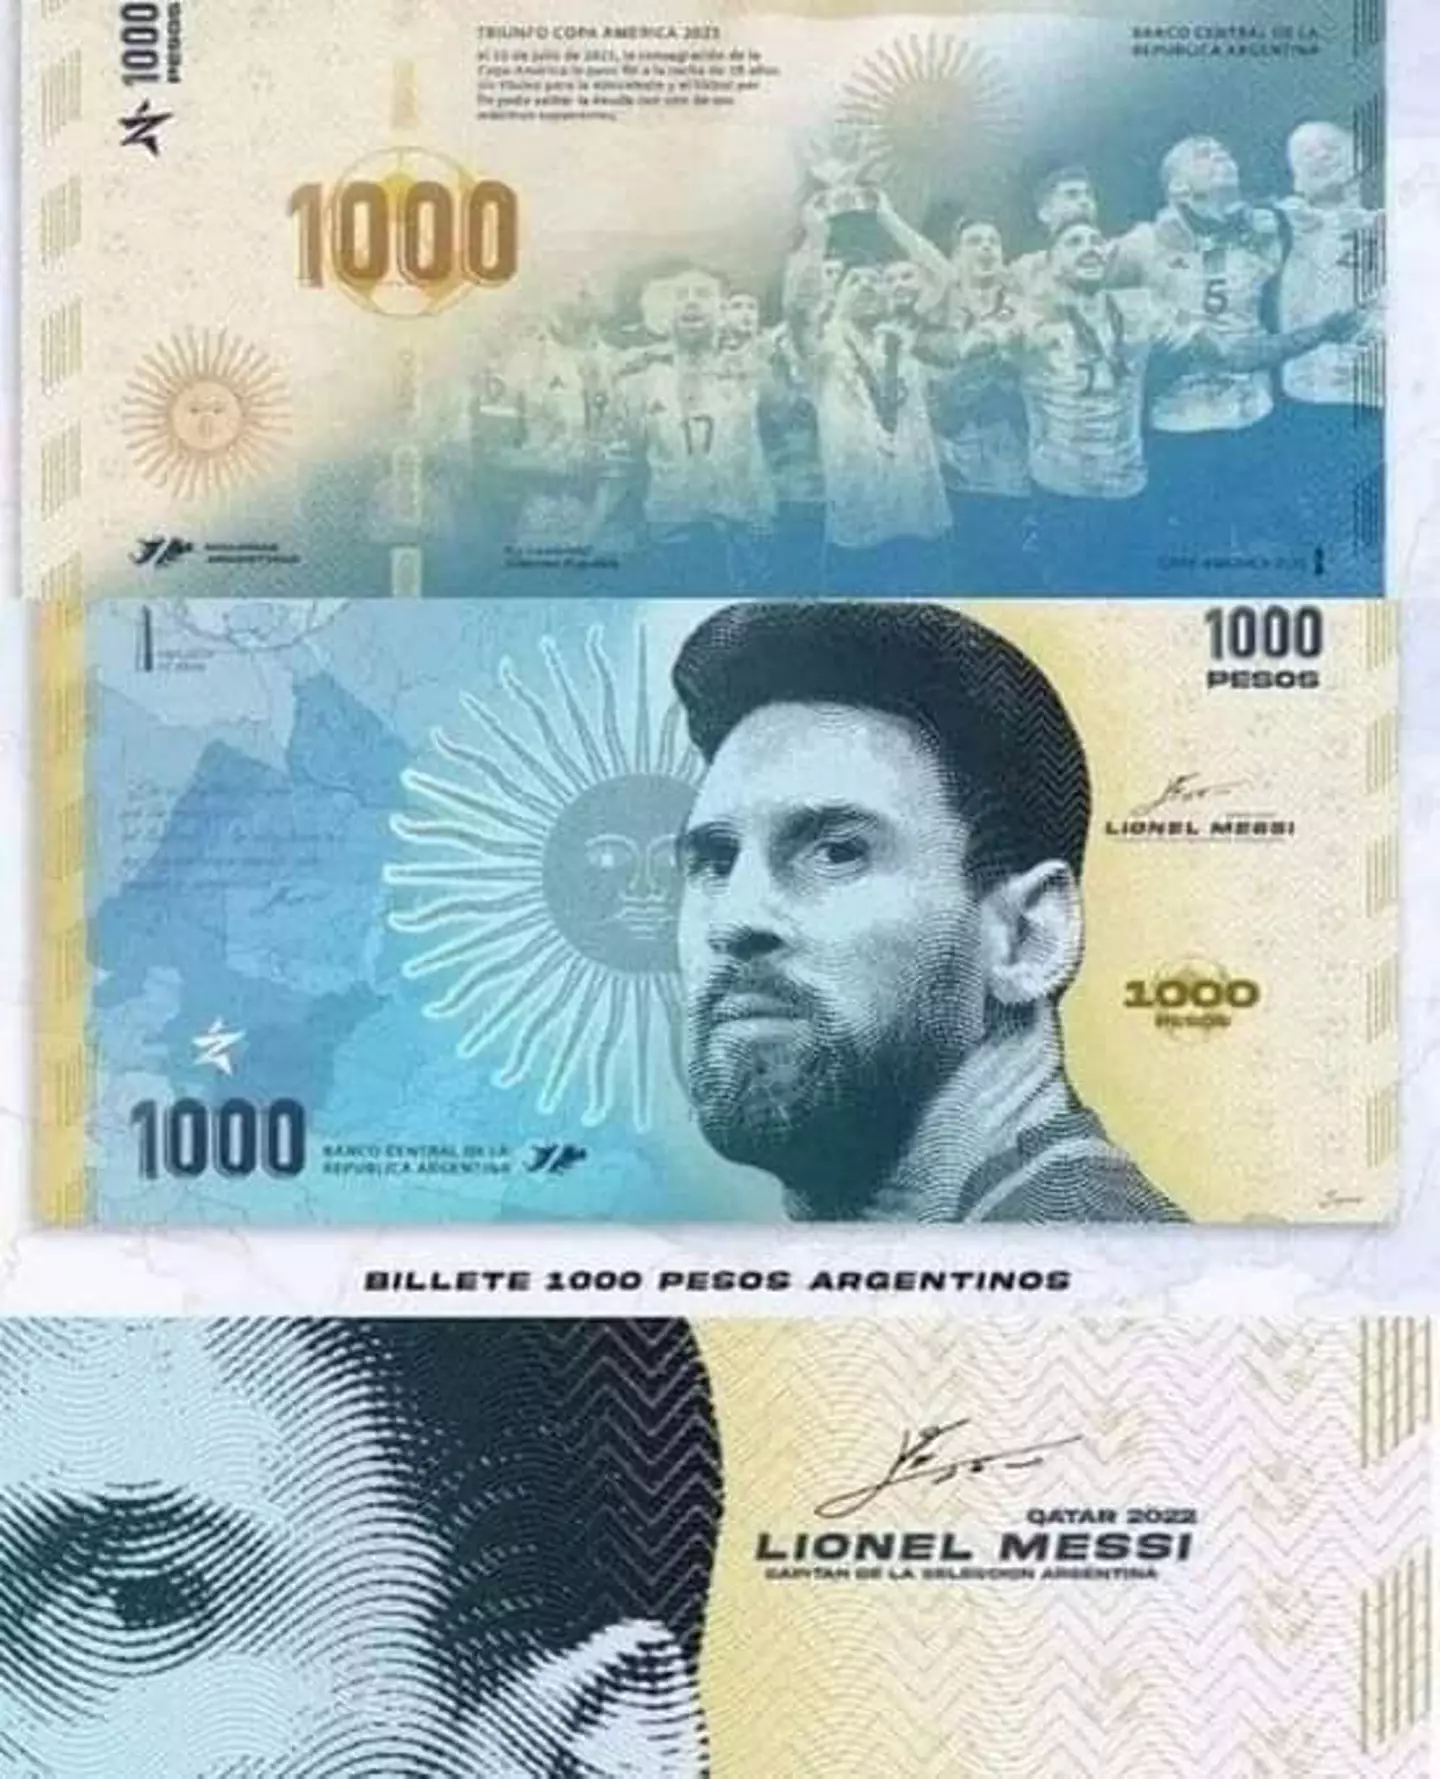 Mock ups of what the note would look like have already emerged online. Image credit: Twitter